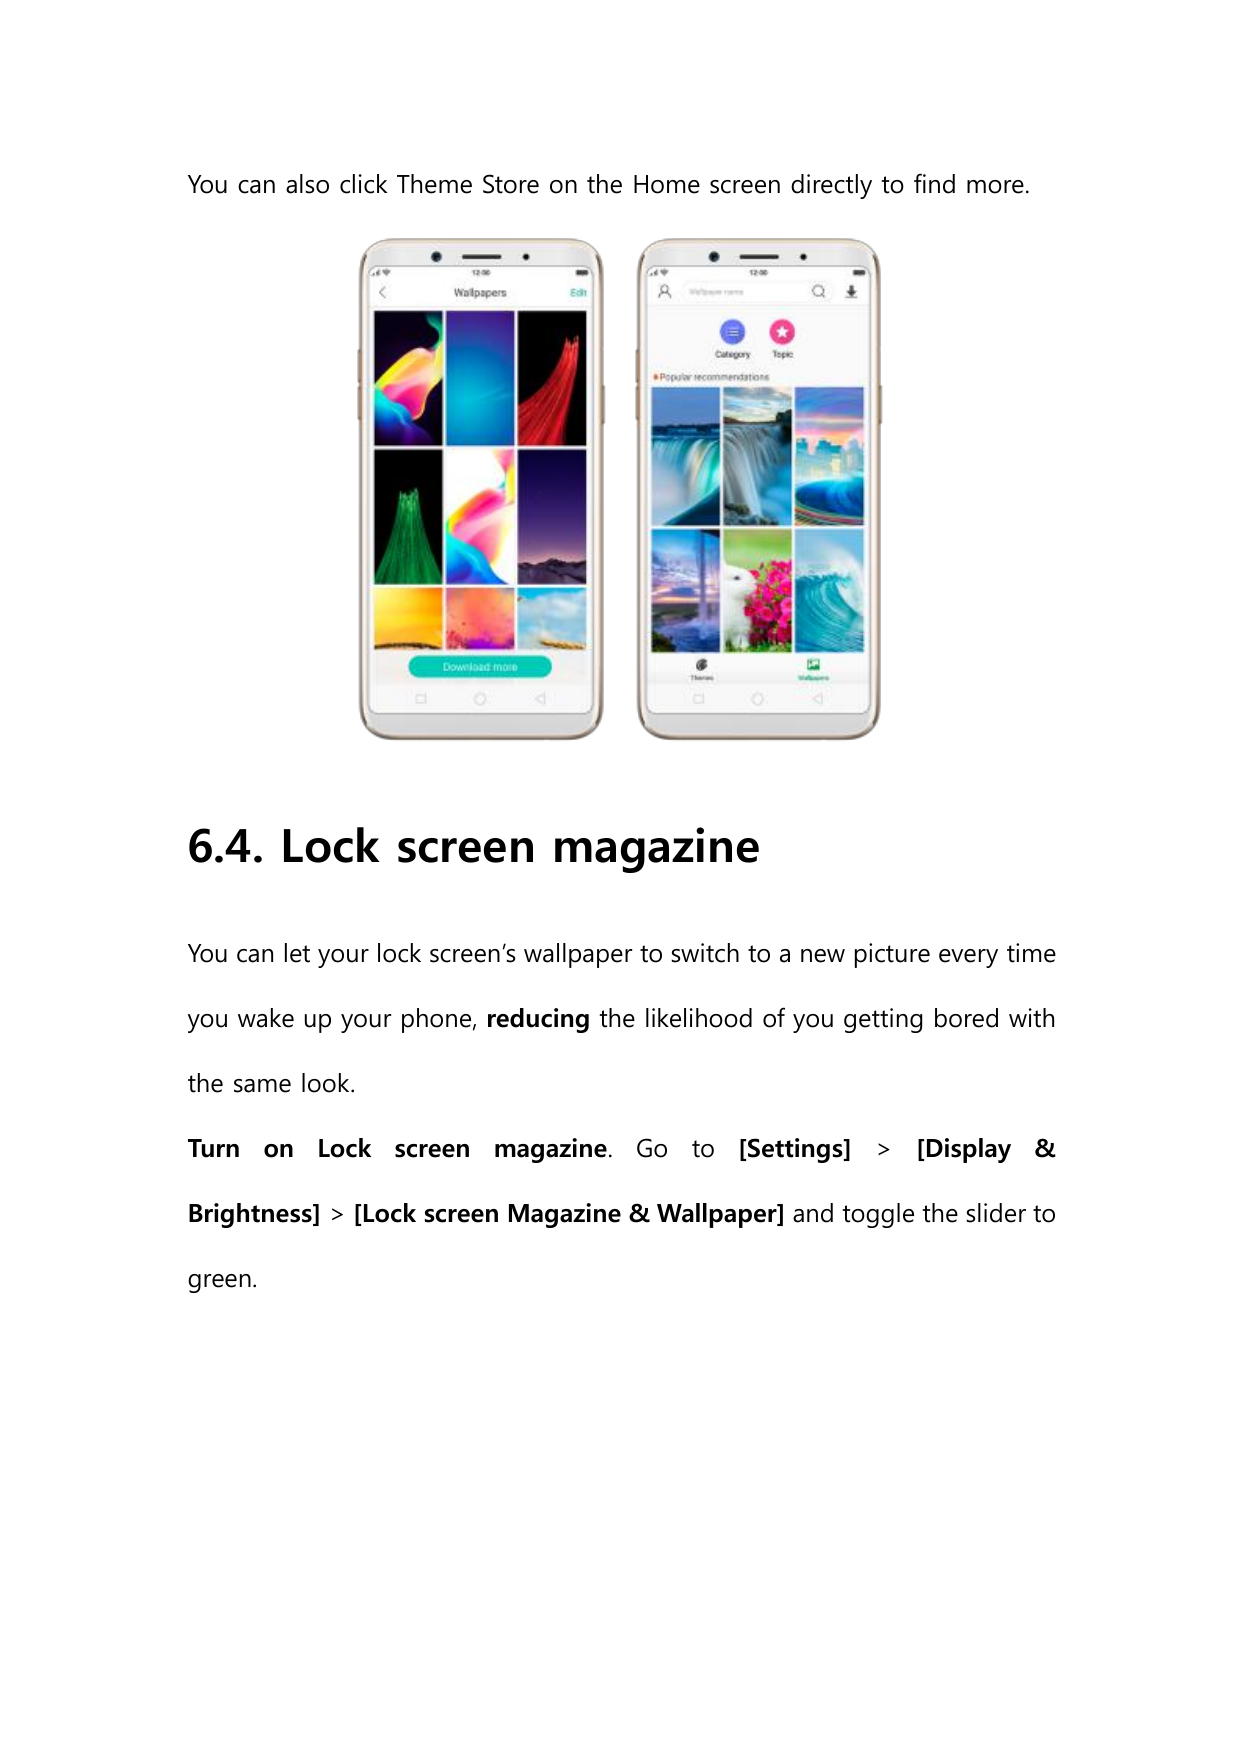 You can also click Theme Store on the Home screen directly to find more.6.4. Lock screen magazineYou can let your lock screen’s 